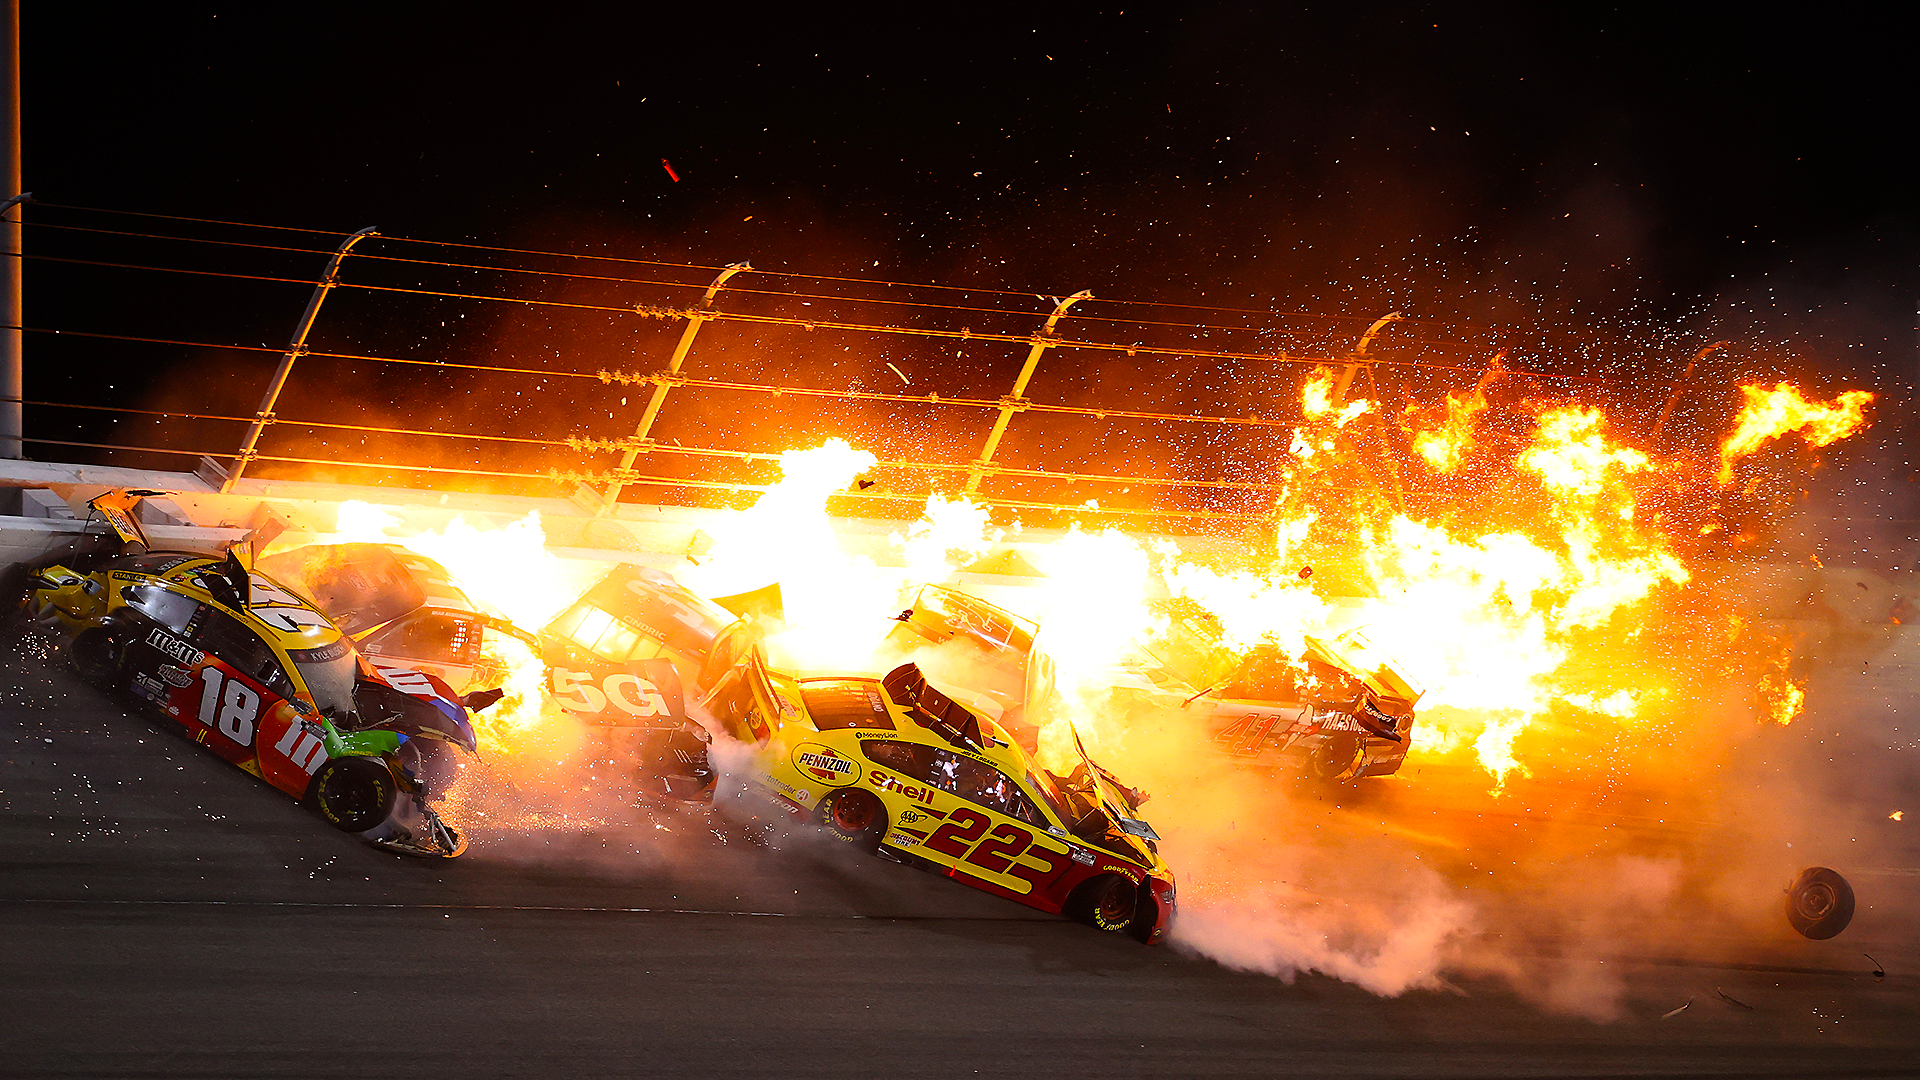 Watch the fiery Daytona 500 crash that caused a wild finish and Michael McDowell's win